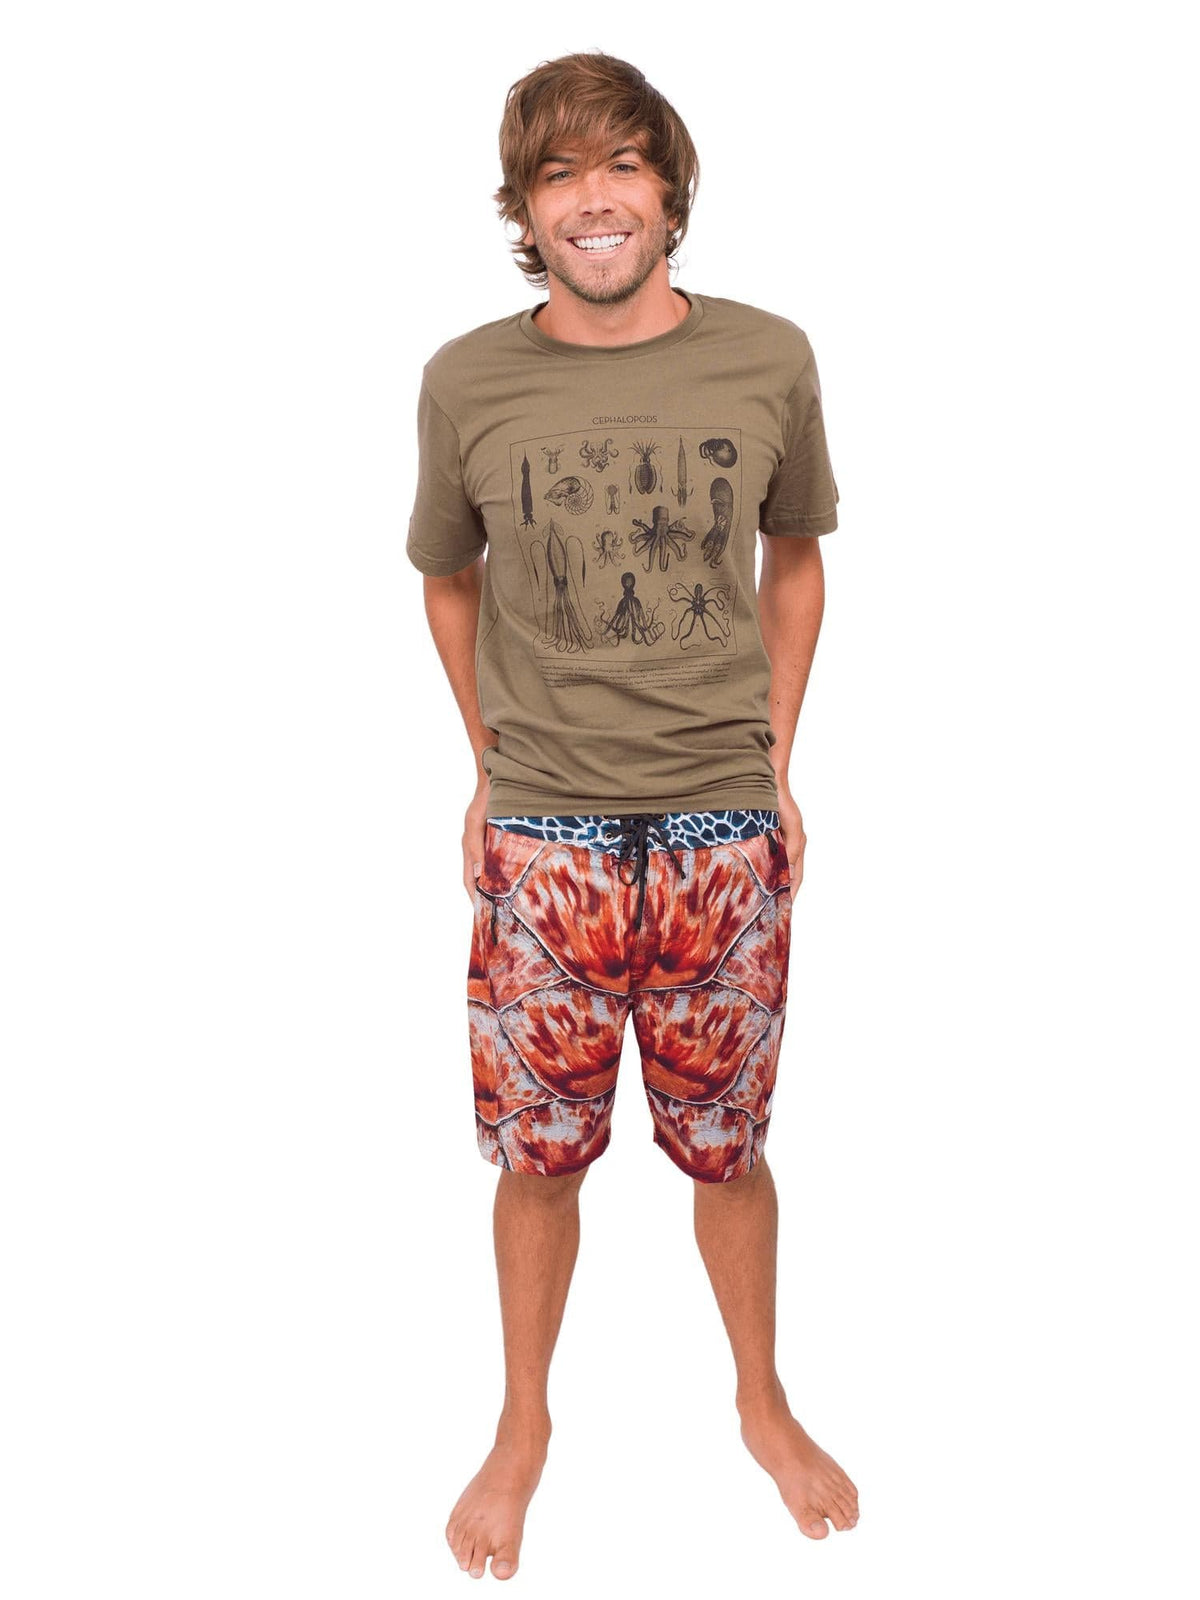 Model: Dan is a sea turtle monitor with Sea Turtle Adventures. He is 5’10, 140 lbs and is wearing a size 31 boardshort and M tee.